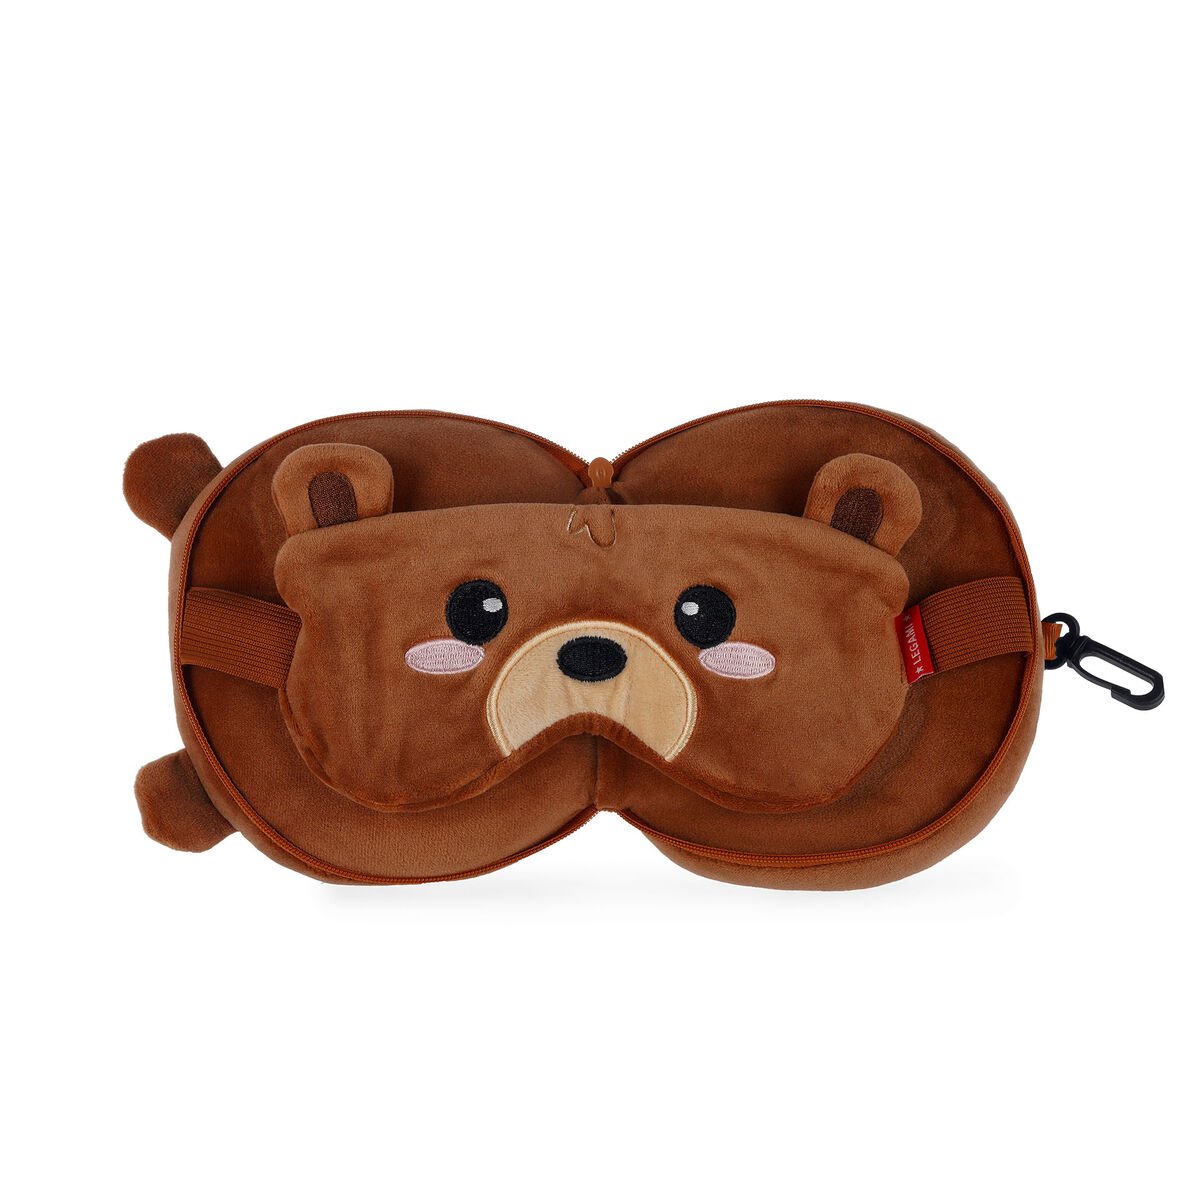 Cute Travel Pillow with Sleep Mask, , zoo